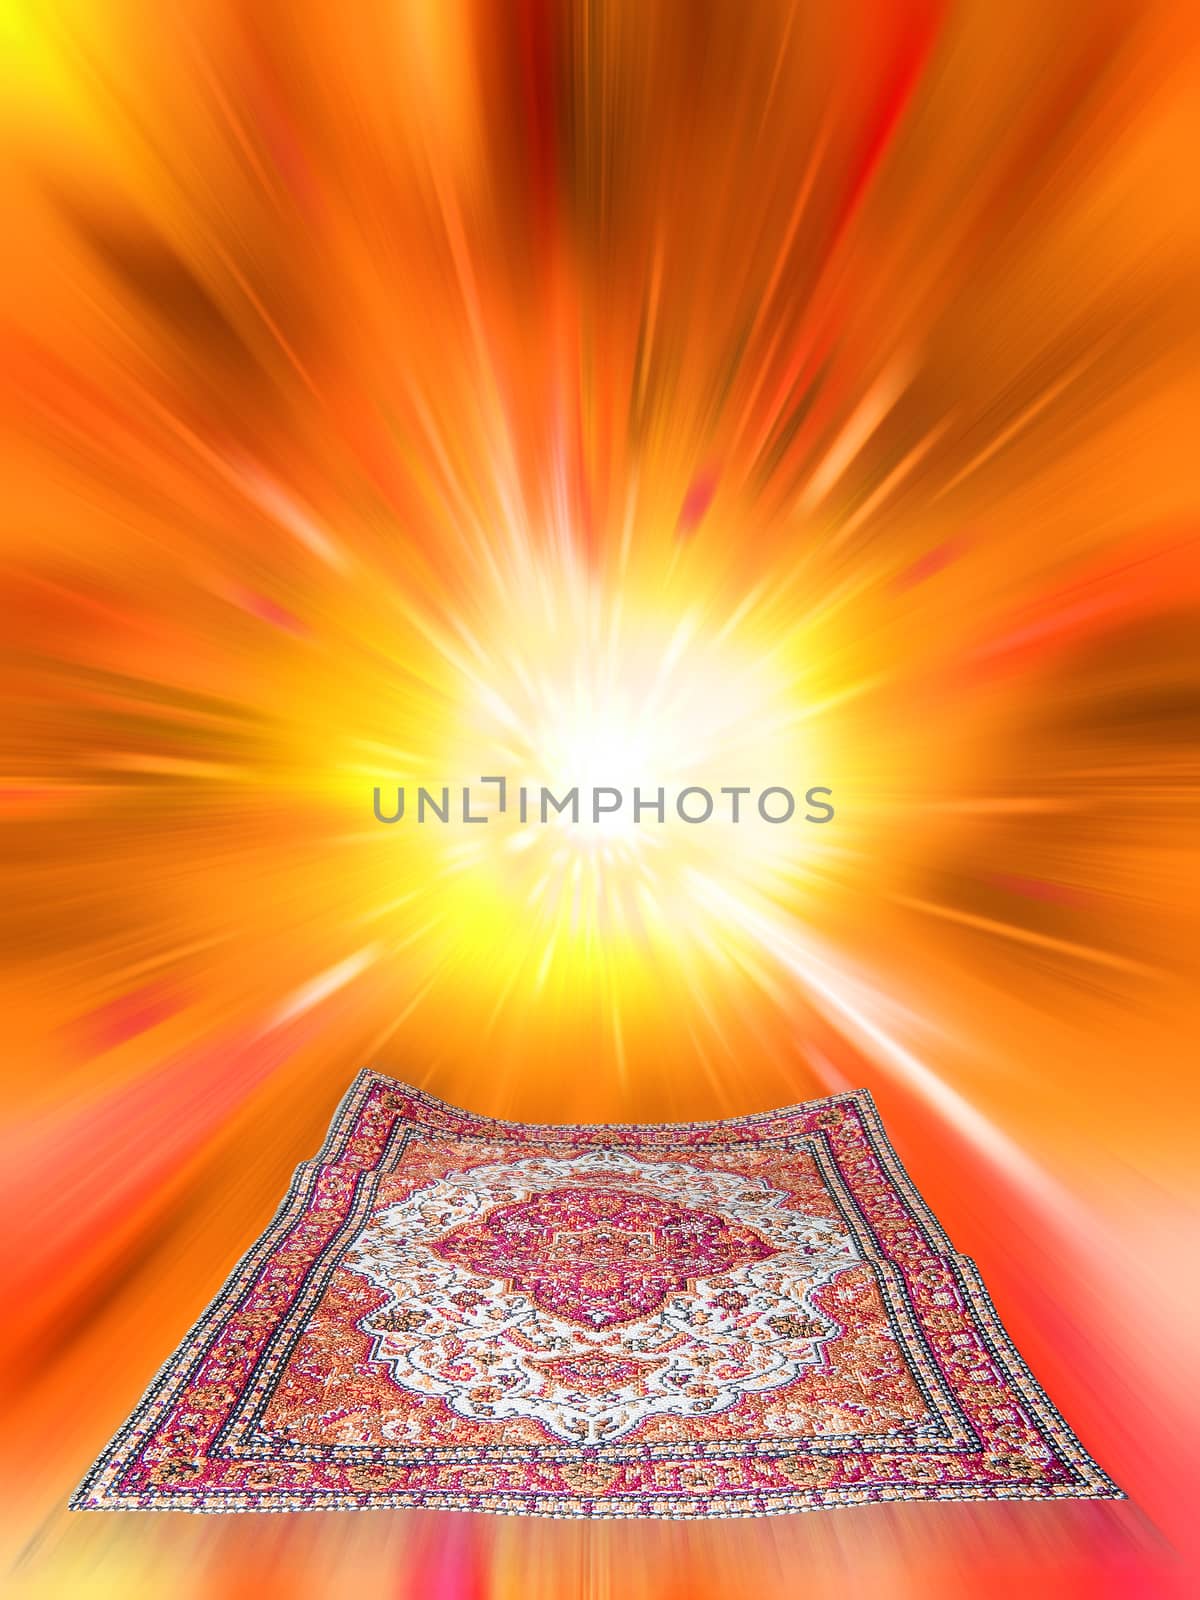 flying magic carpet on motion abstract background